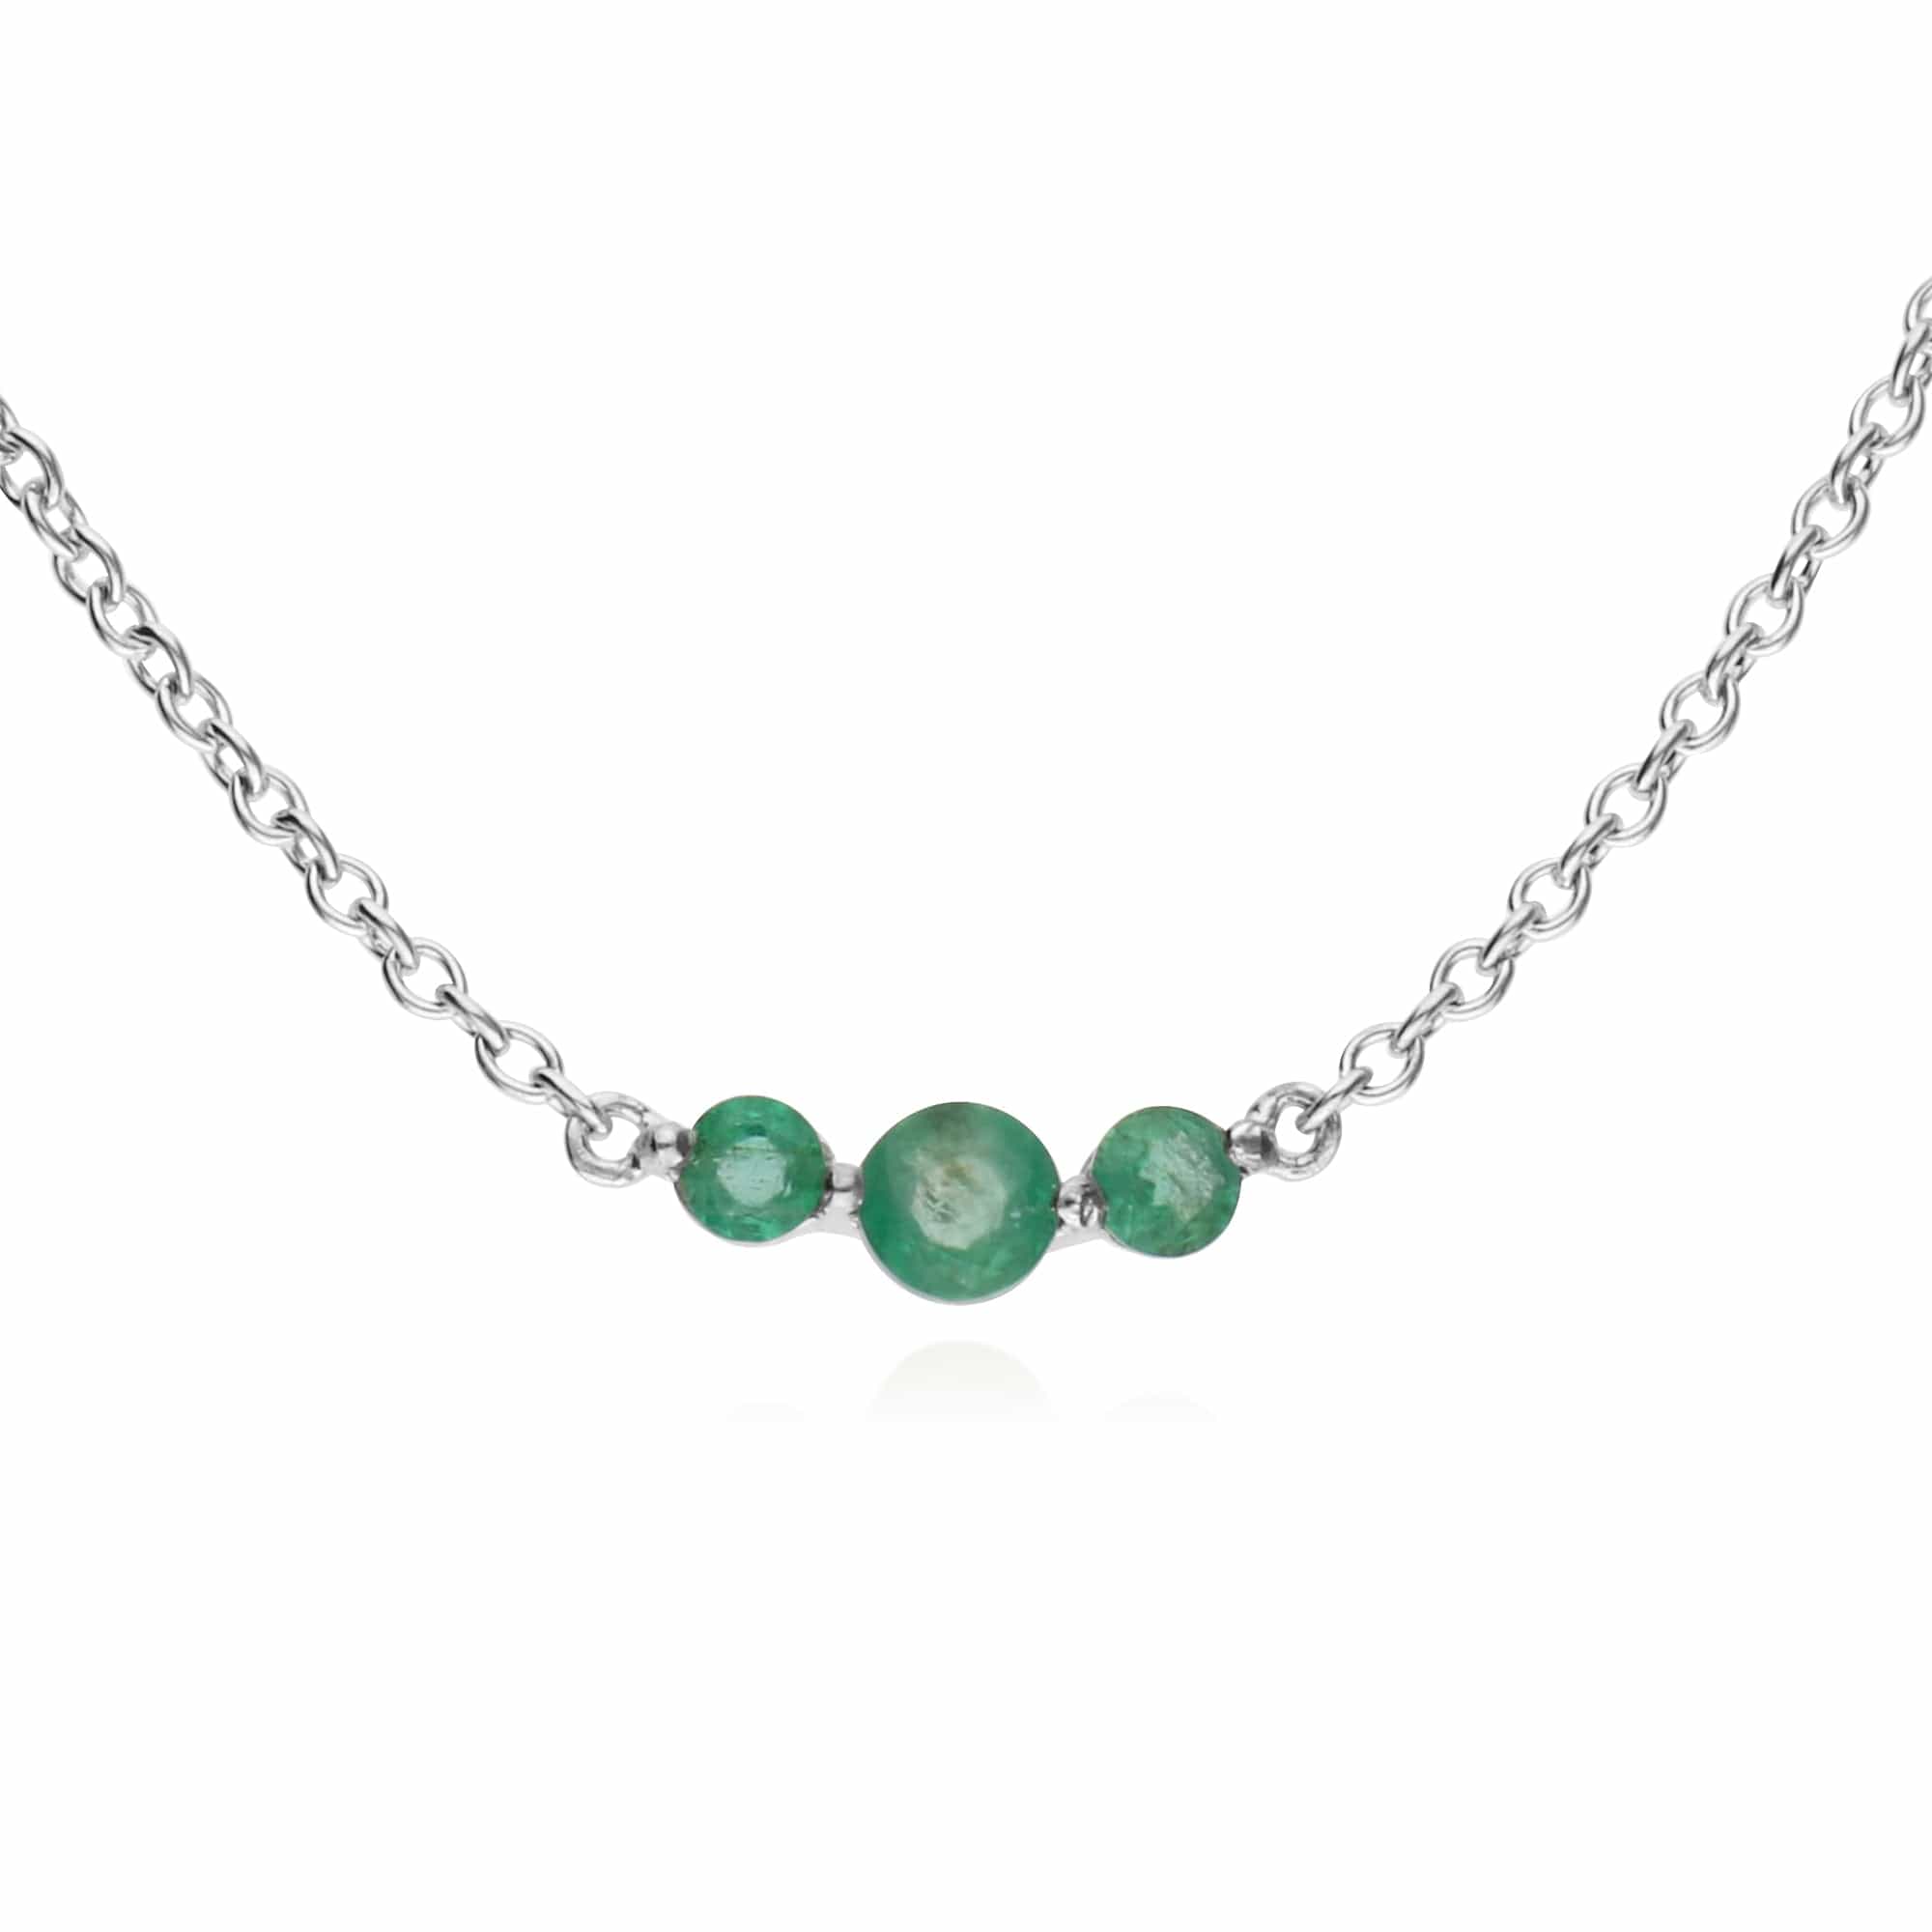 270E025507925-270N034207925 Classic Round Emerald Three Stone Earrings & Necklace Set in 925 Sterling Silver 3